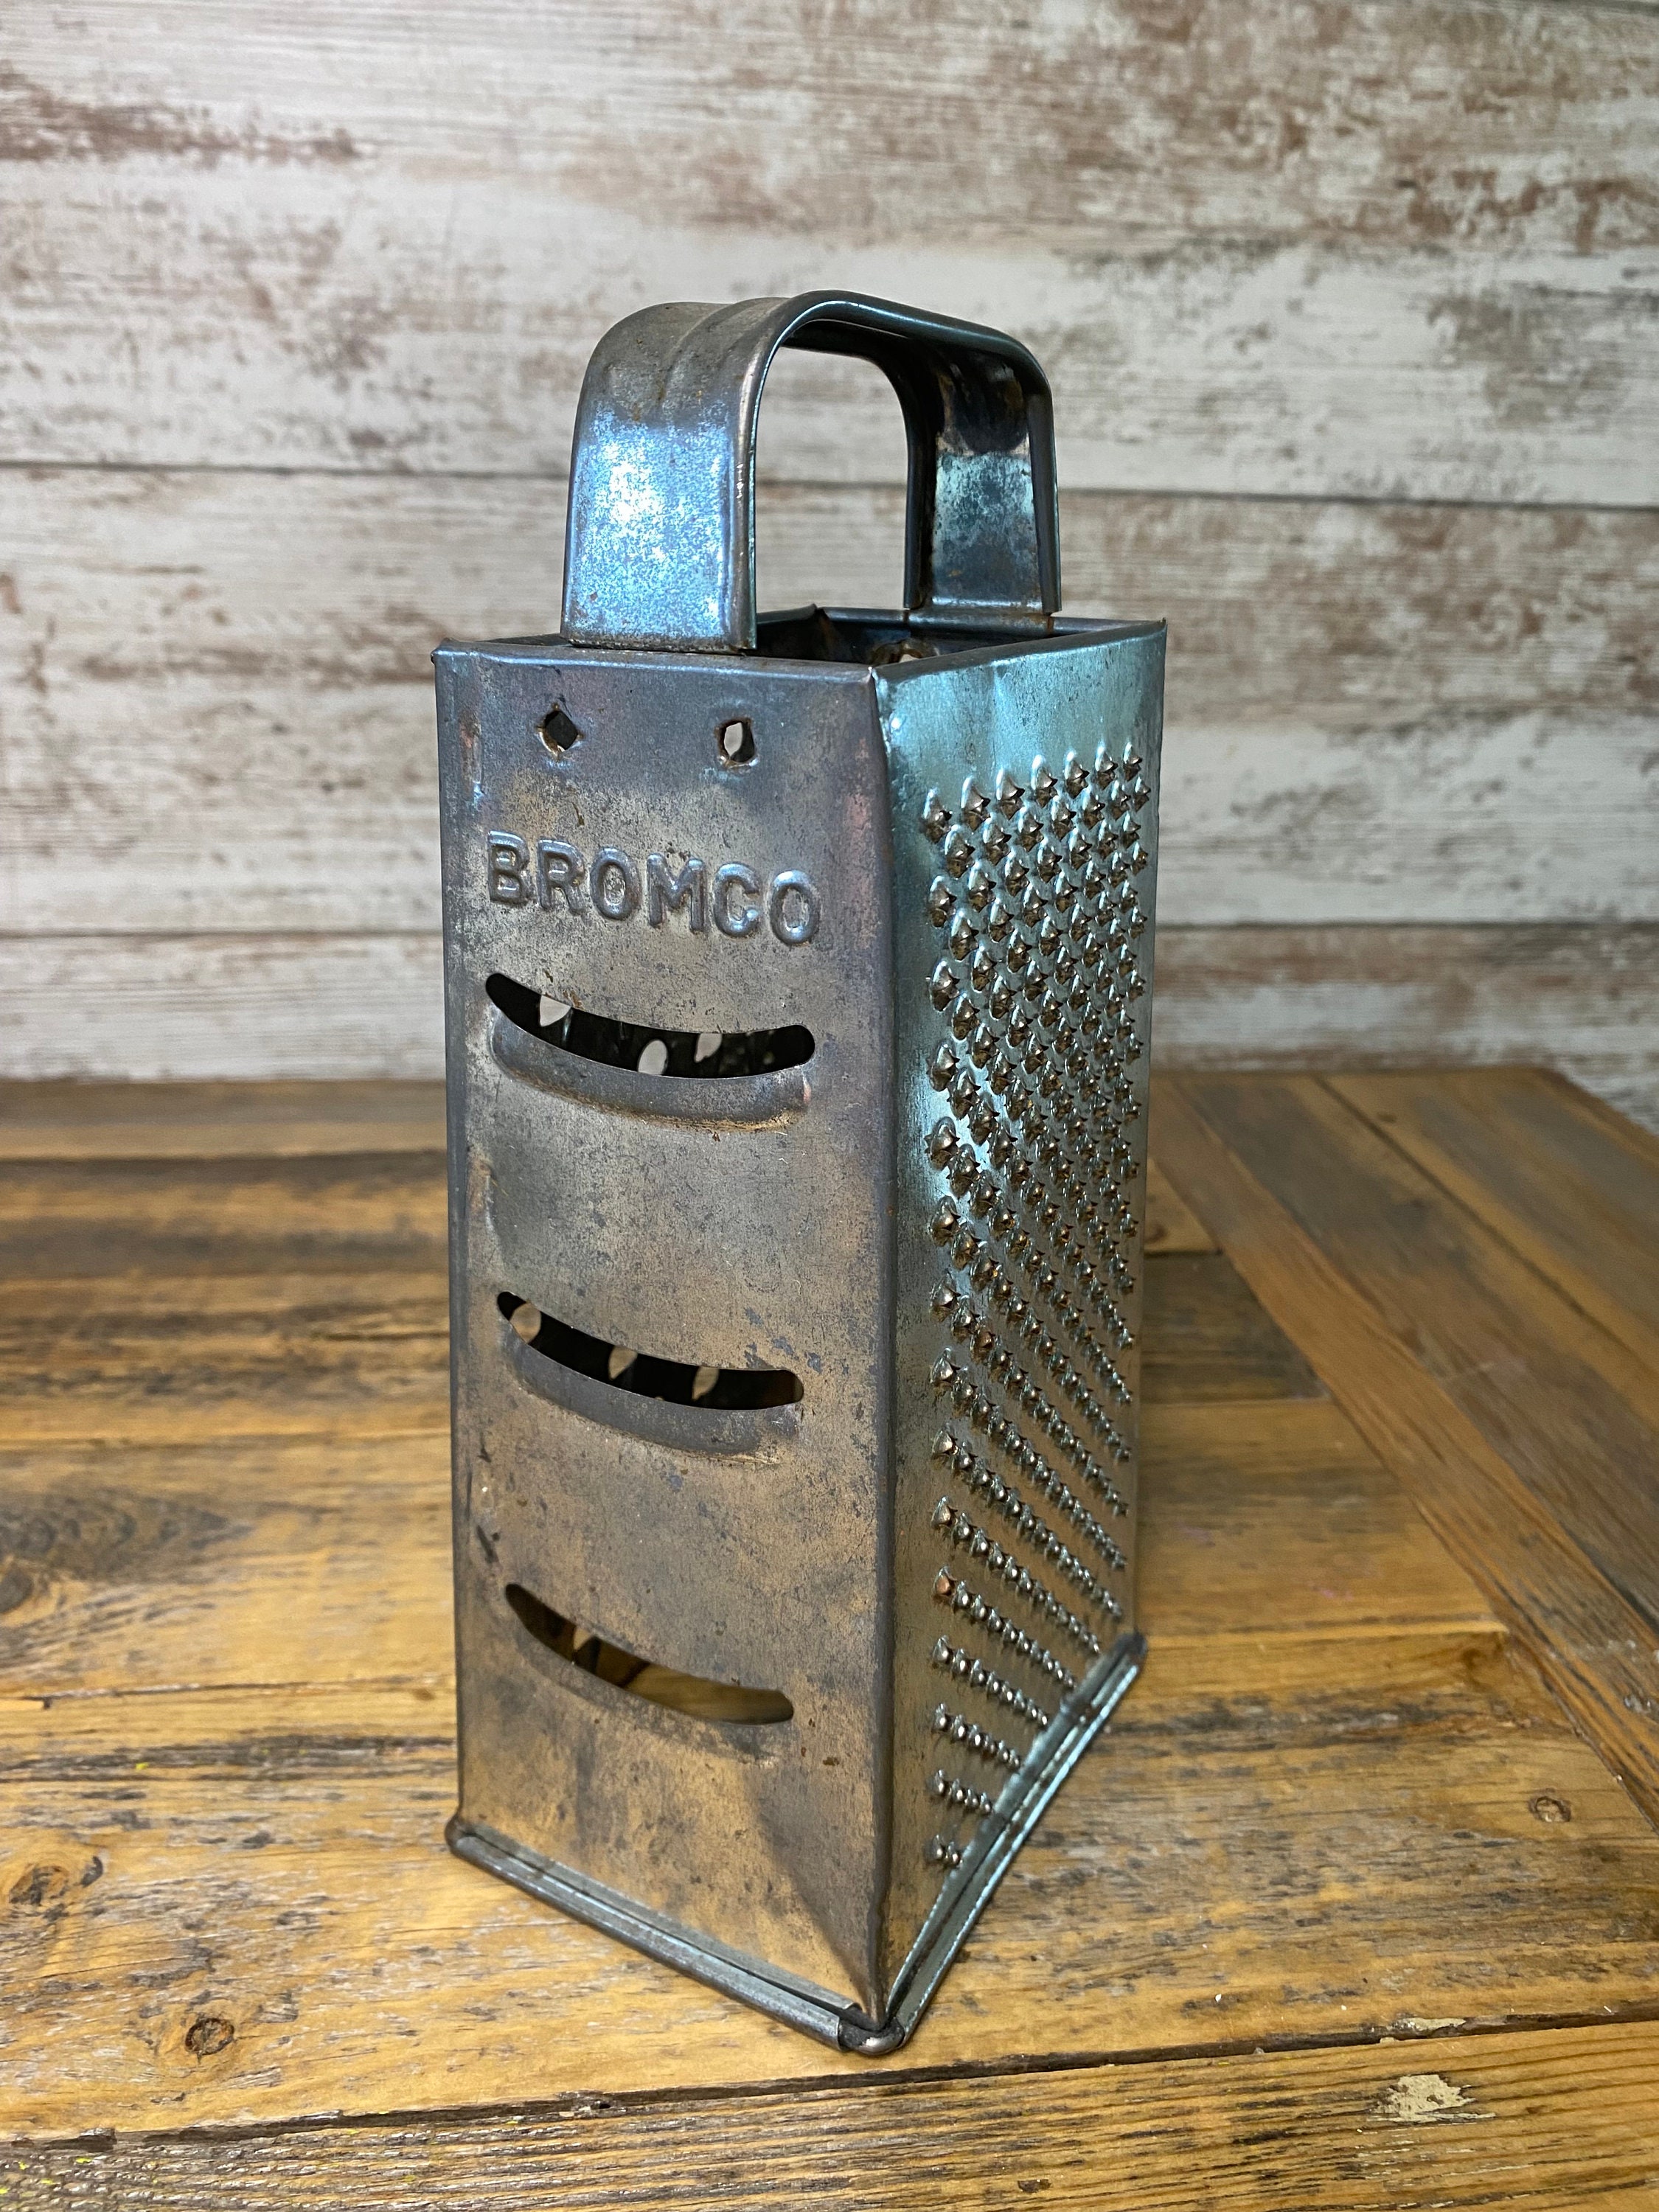 Antique Wood and Tin Cheese Grater